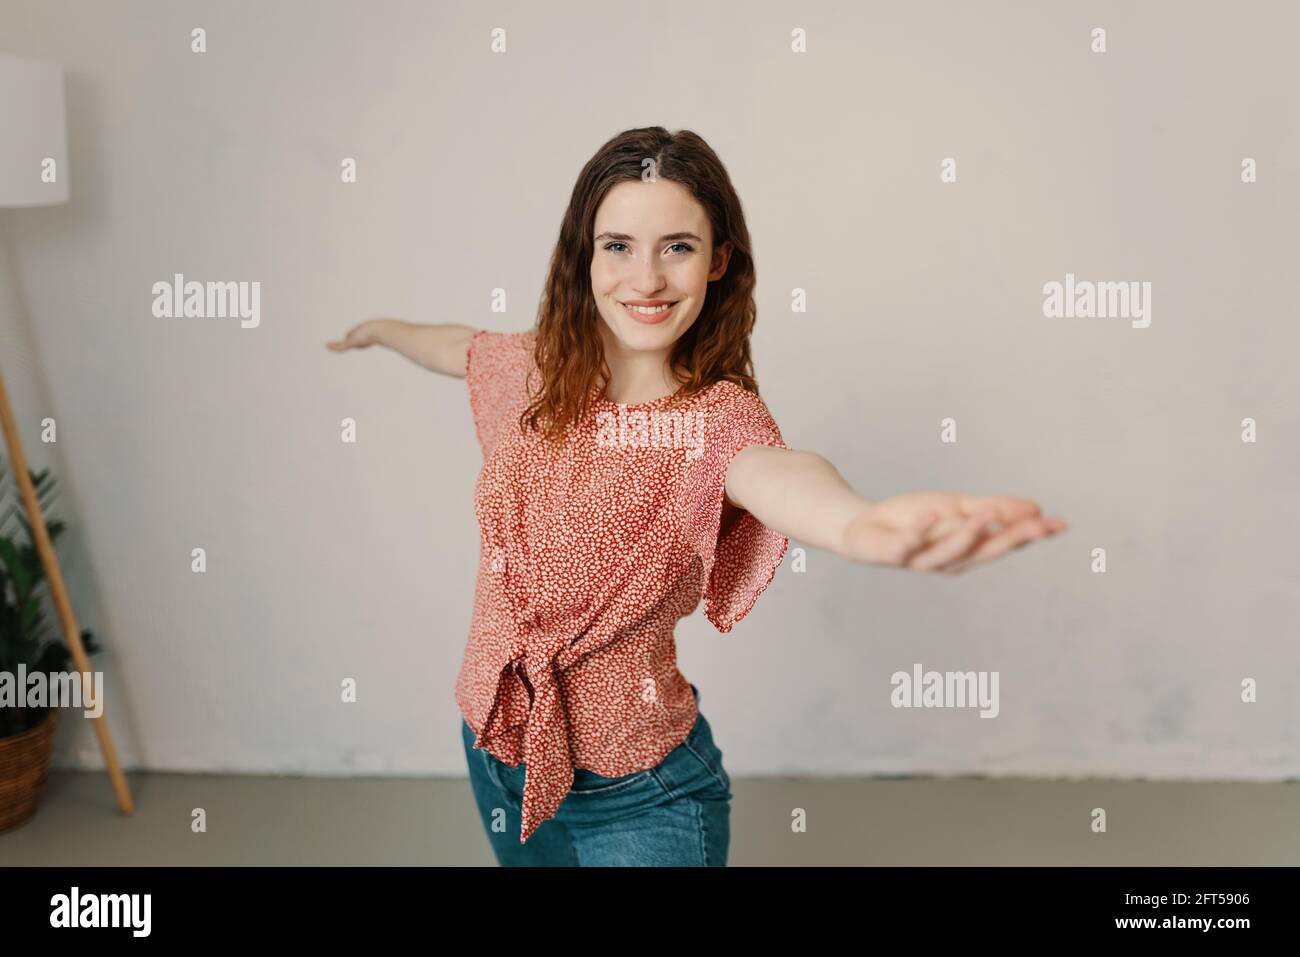 Graceful happy young woman doing yoga exercises posing with outstretched arms looking at the camera with a lovely friendly smile with copyspace in a h Stock Photo